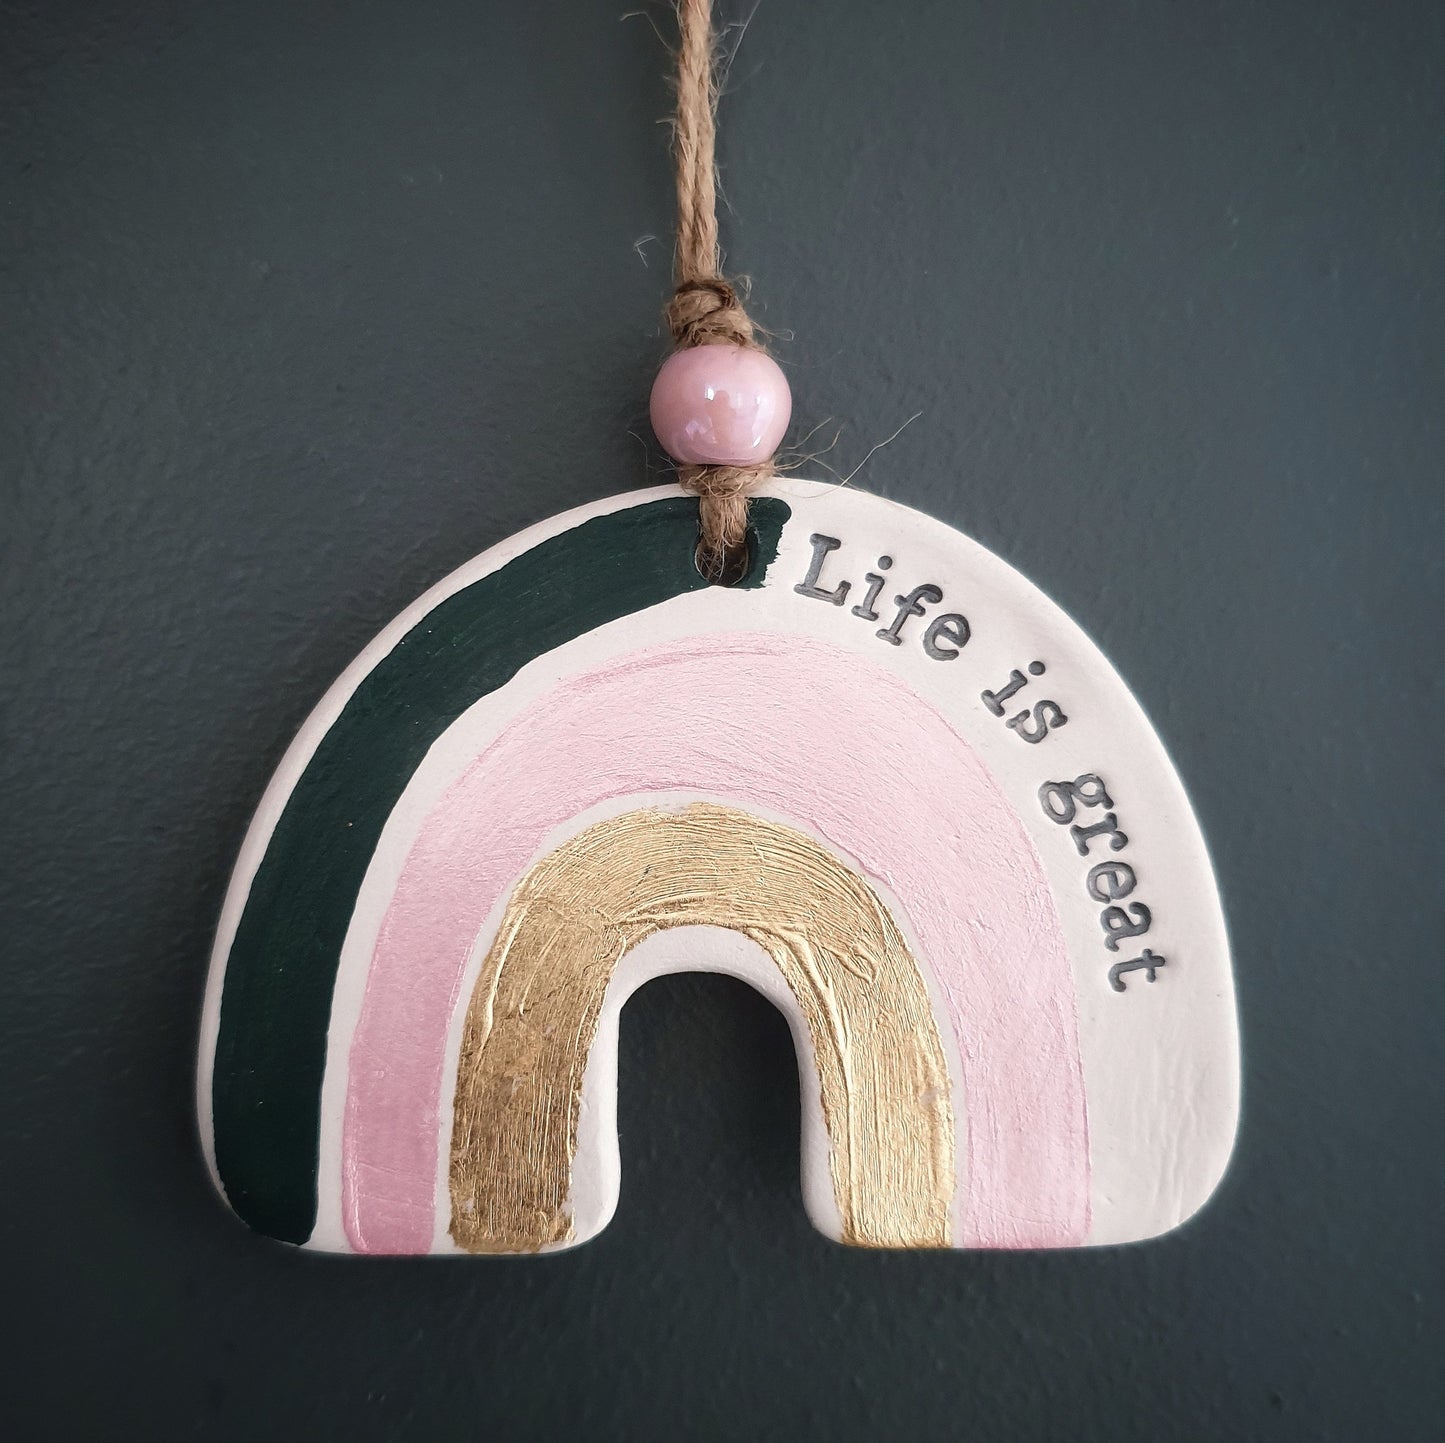 Life is great rainbow wall hanging